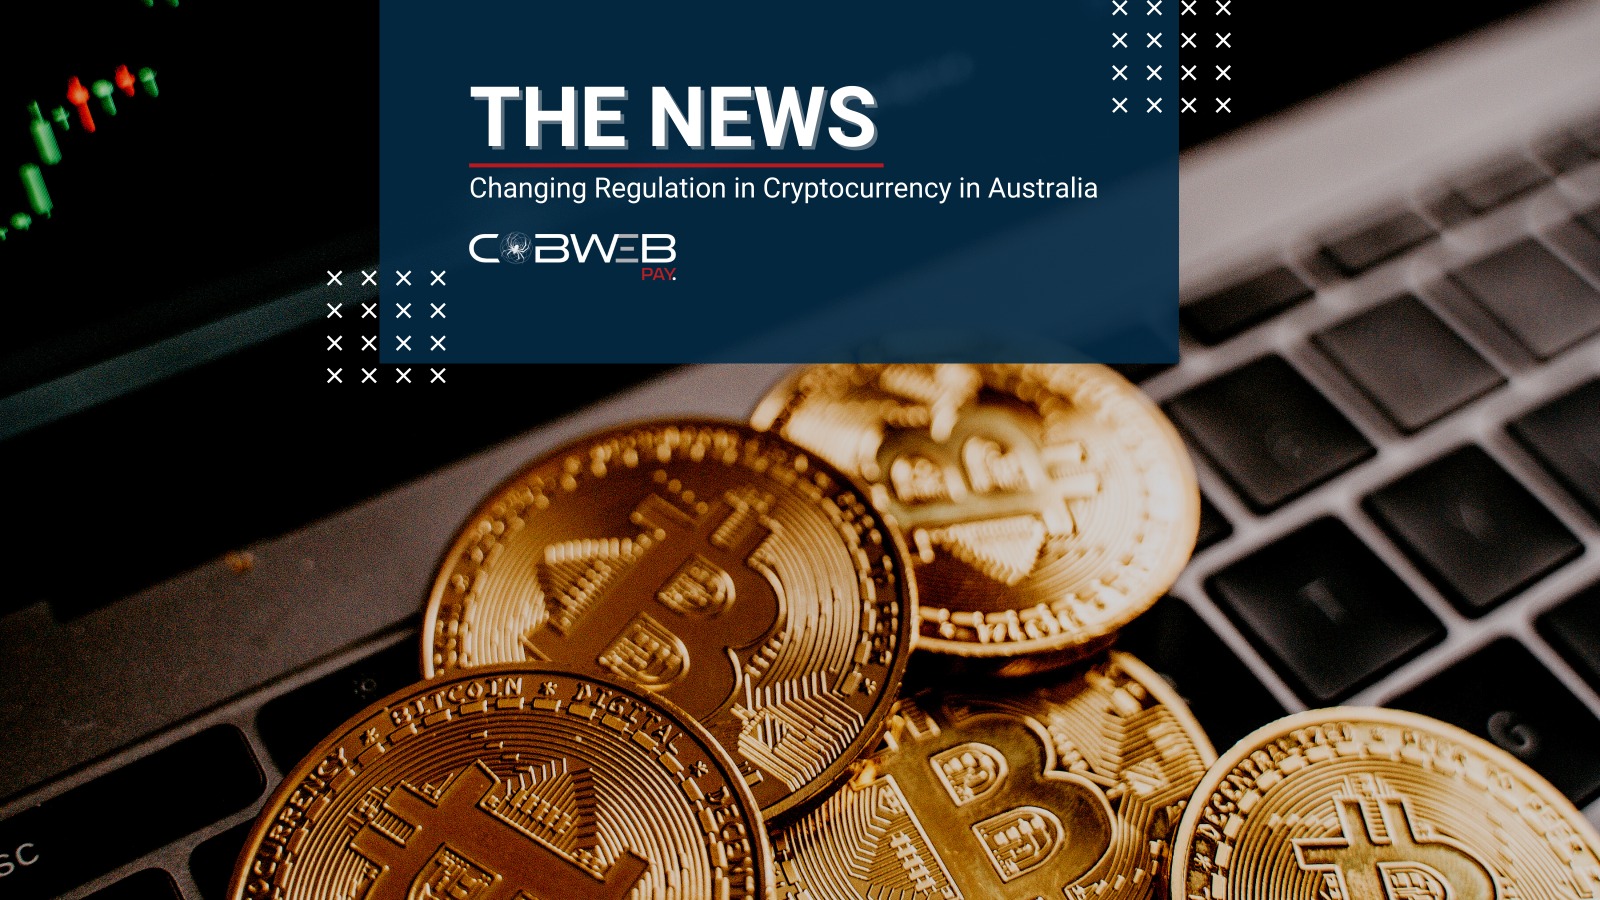 Changing Regulation in Cryptocurrency in Australia
